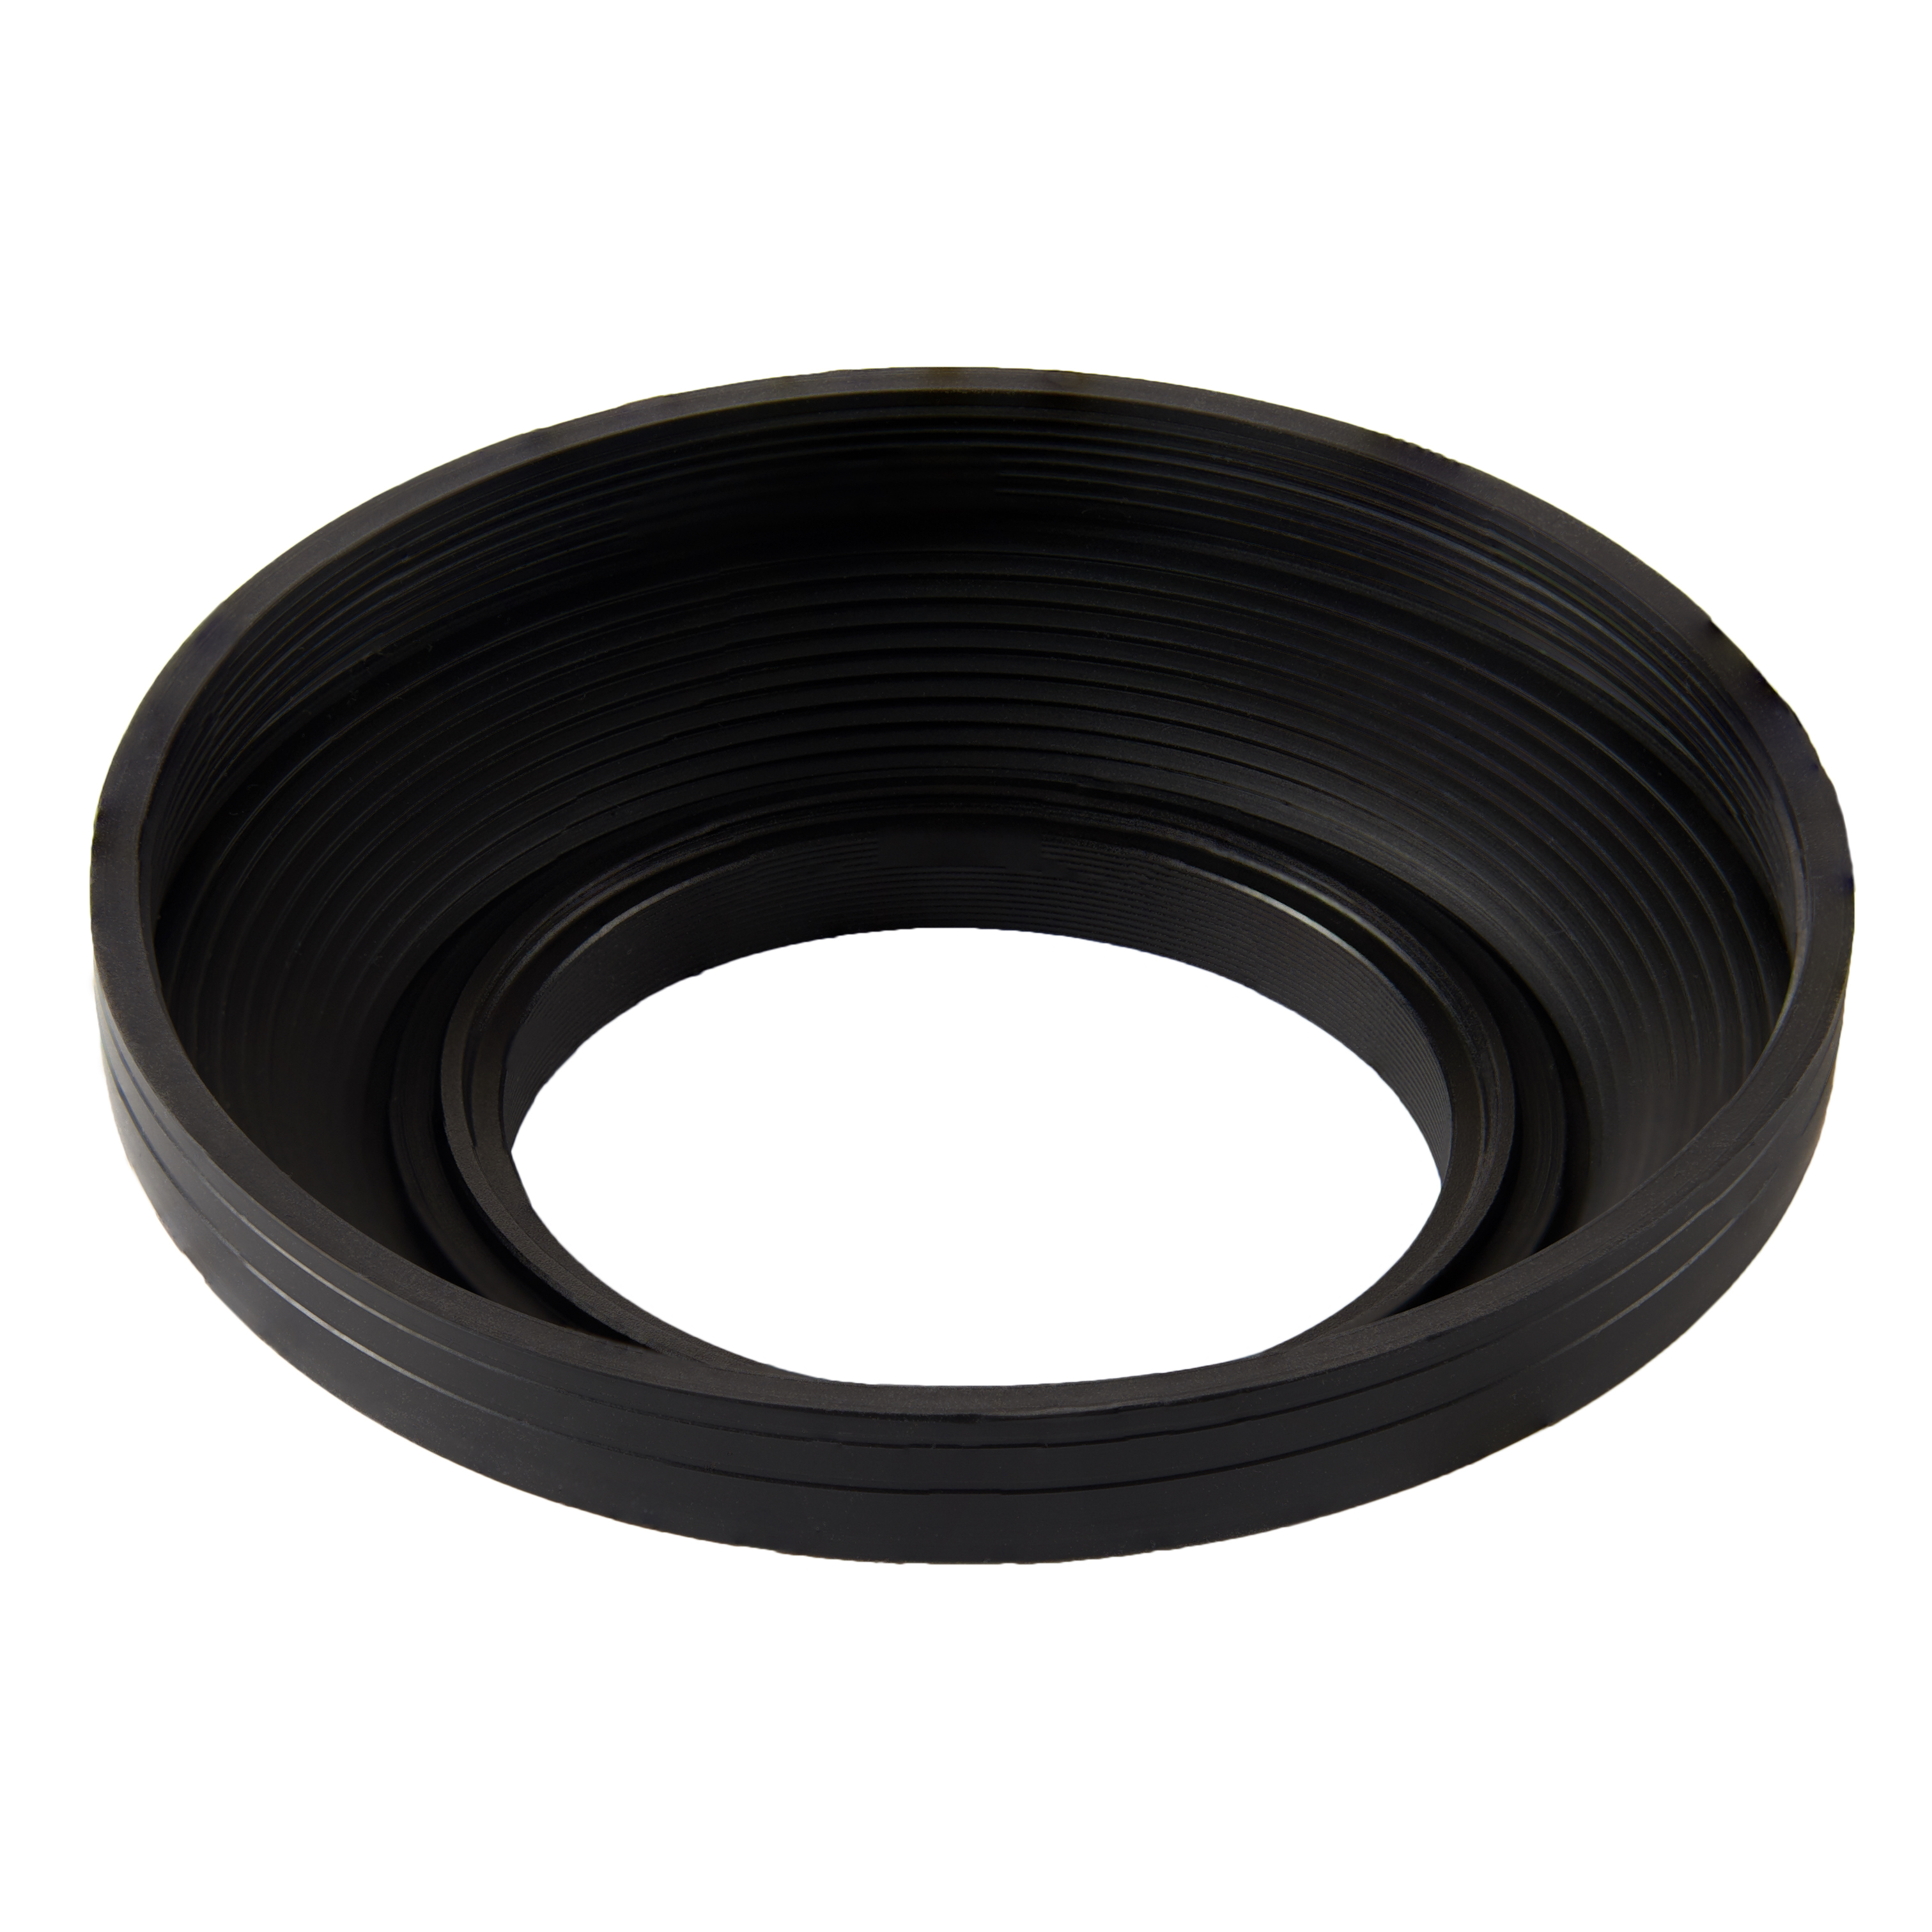 Promaster 7614 52mm Wide Rubber Lens Hood